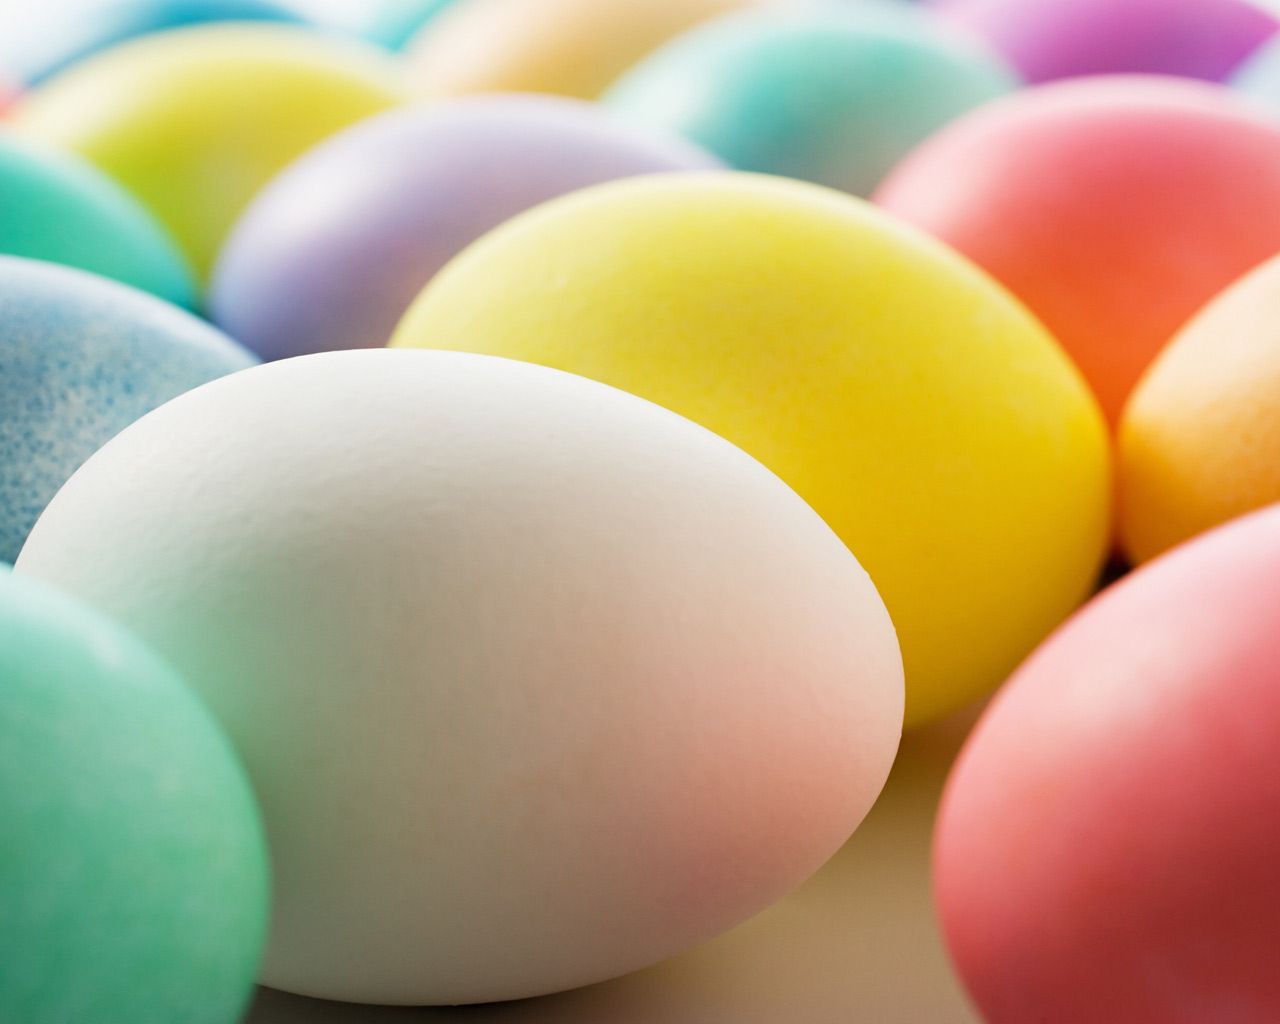 A close up of several colored easter eggs - Egg